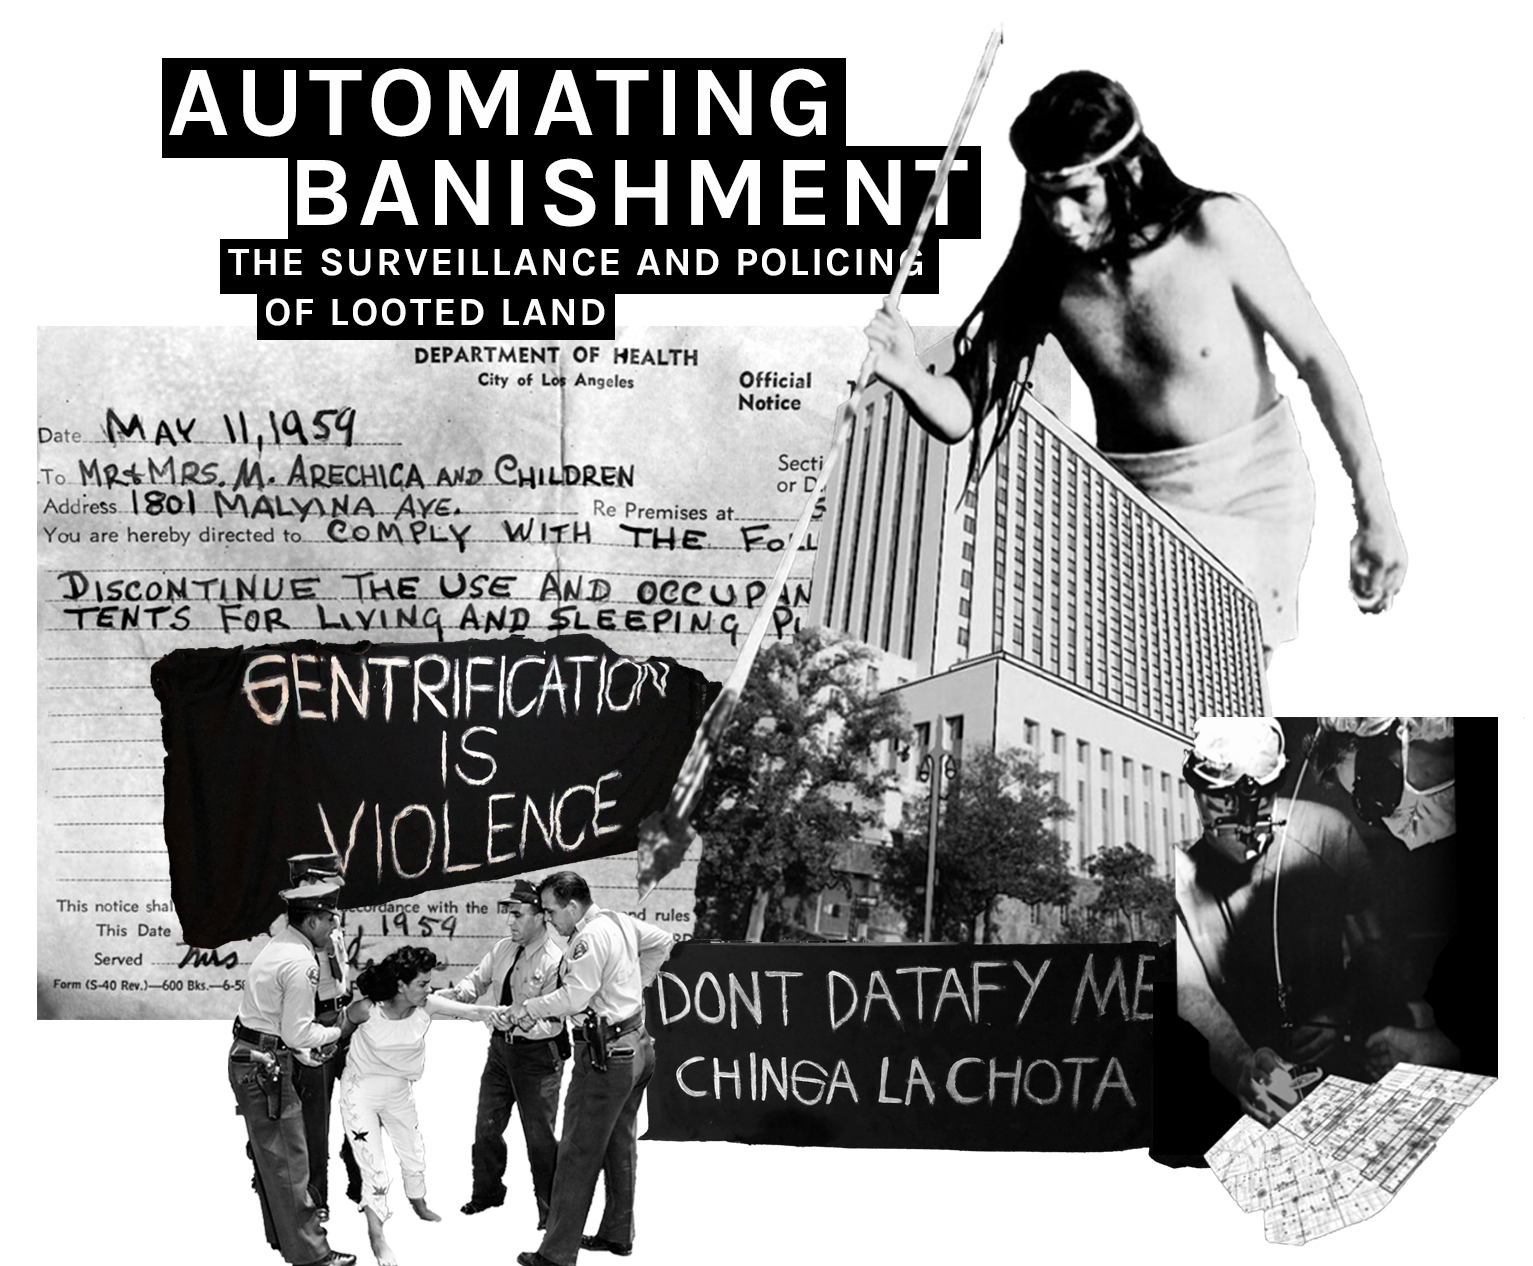 Automating Banishment: The Surveillance and Policing of Stolen Land. November 2021. Cover art shows protest banners Gentrification is violence and Don't Datafy Me, Chinga La Chota